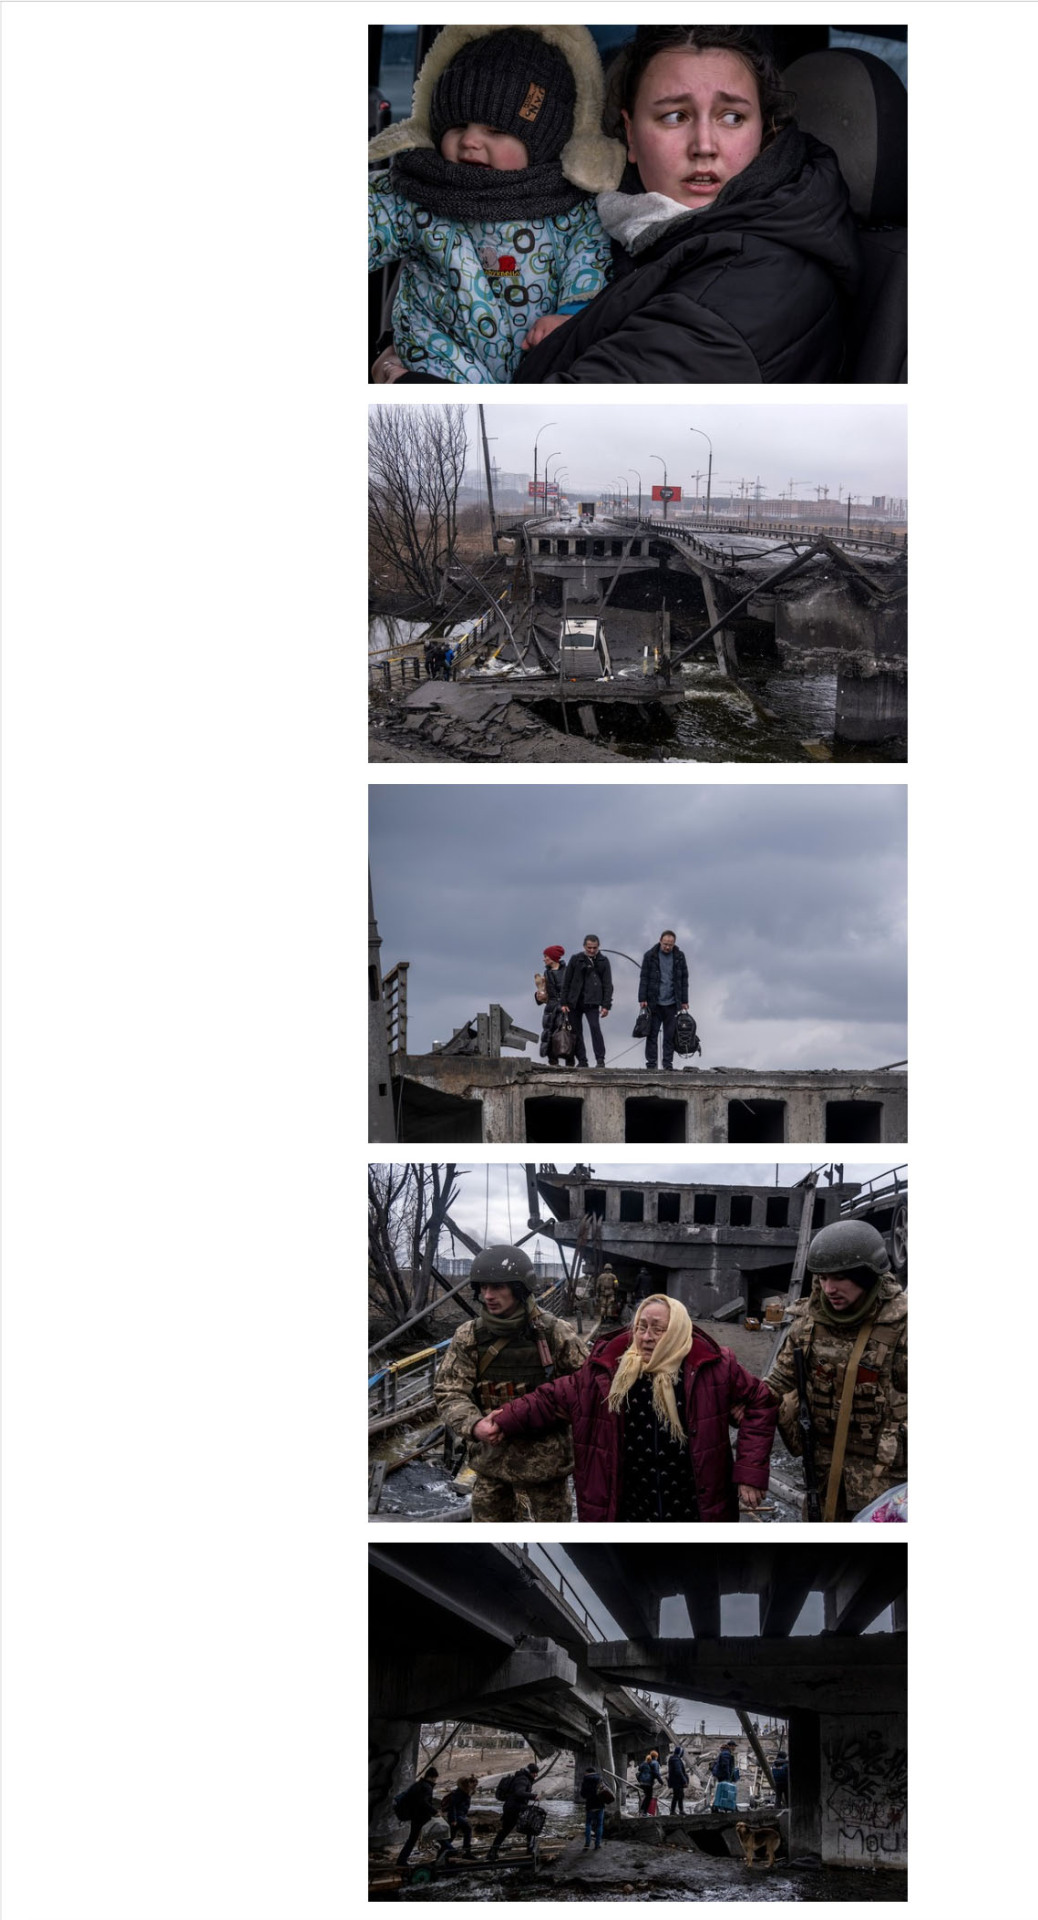 Photos by Ron Haviv / VII of Ukrainians fleeing the embattled city of Irpin during the Russian invasion of Ukraine. The Economist 1843 Magazine, March 17, 2022 issue.